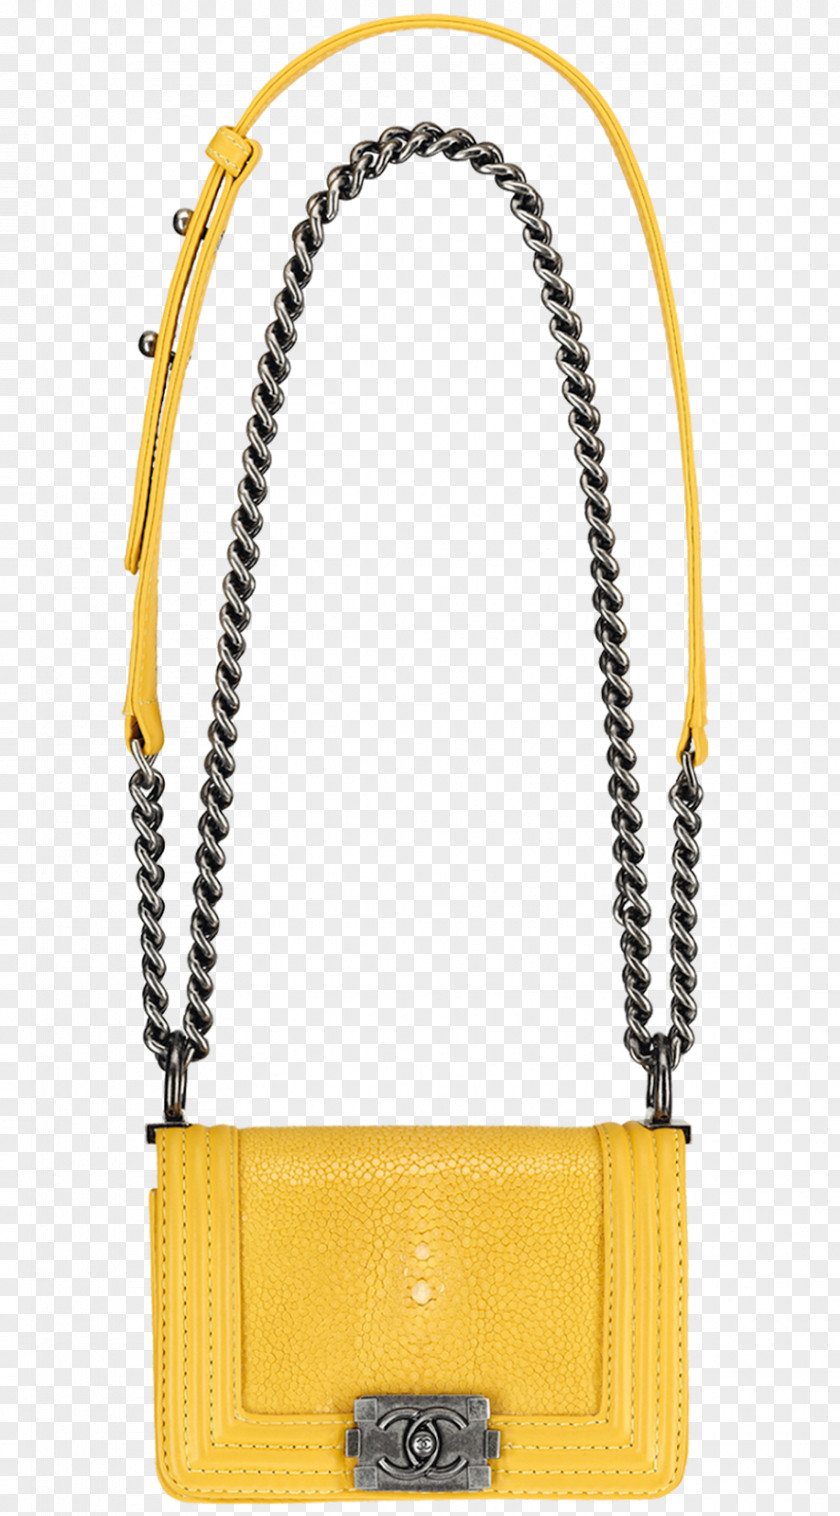 Kate Chanel Earring Jewellery Necklace Bag PNG